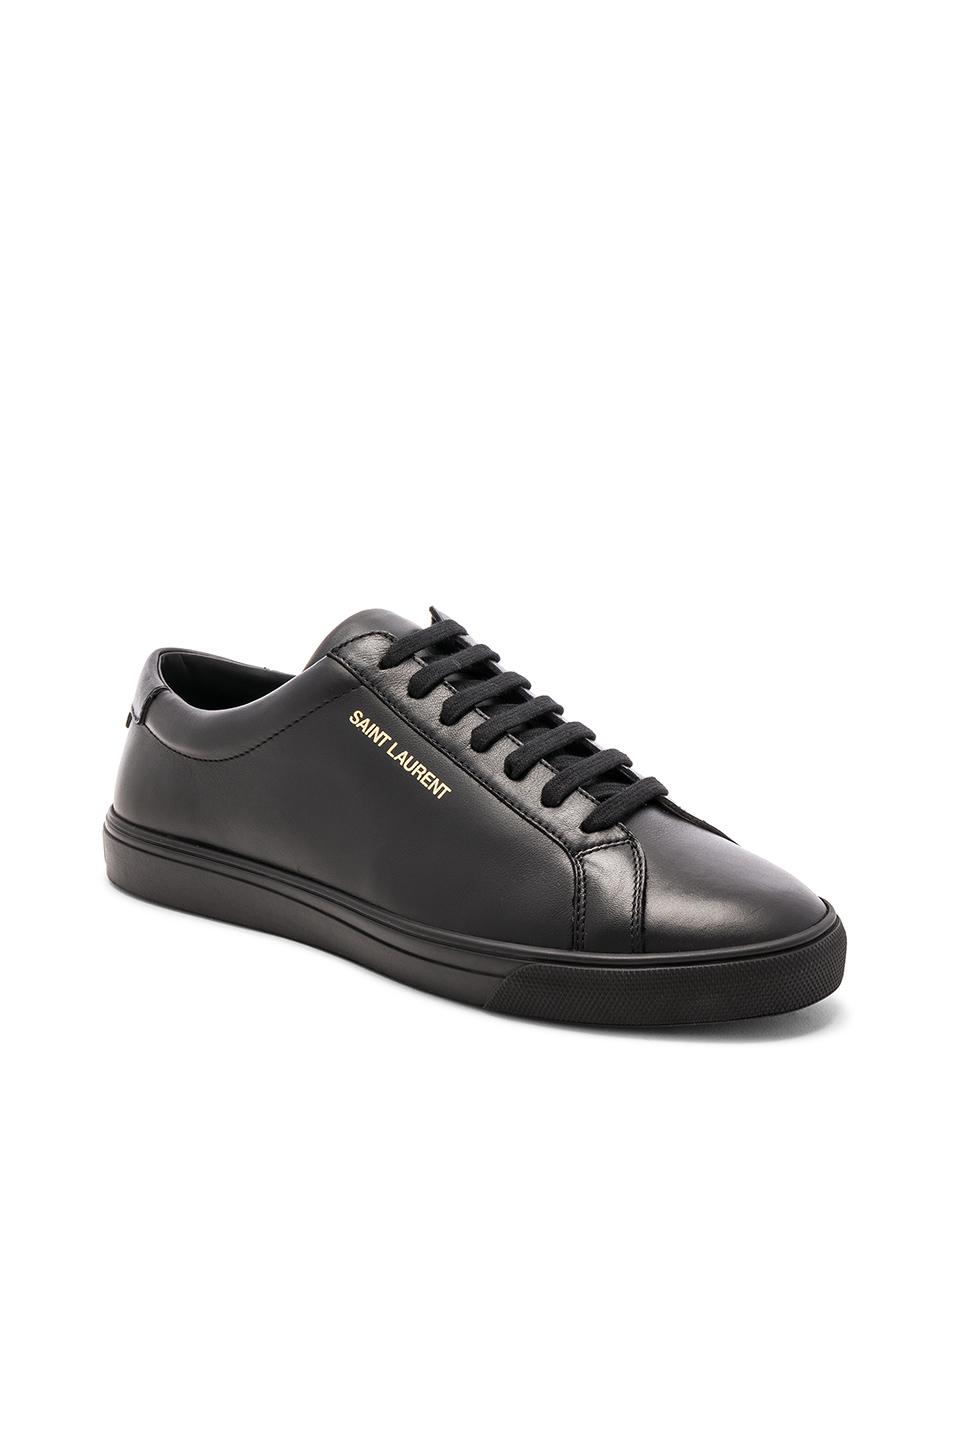 Saint Laurent Leather Andy Low Top Sneakers in Black for Men - Lyst